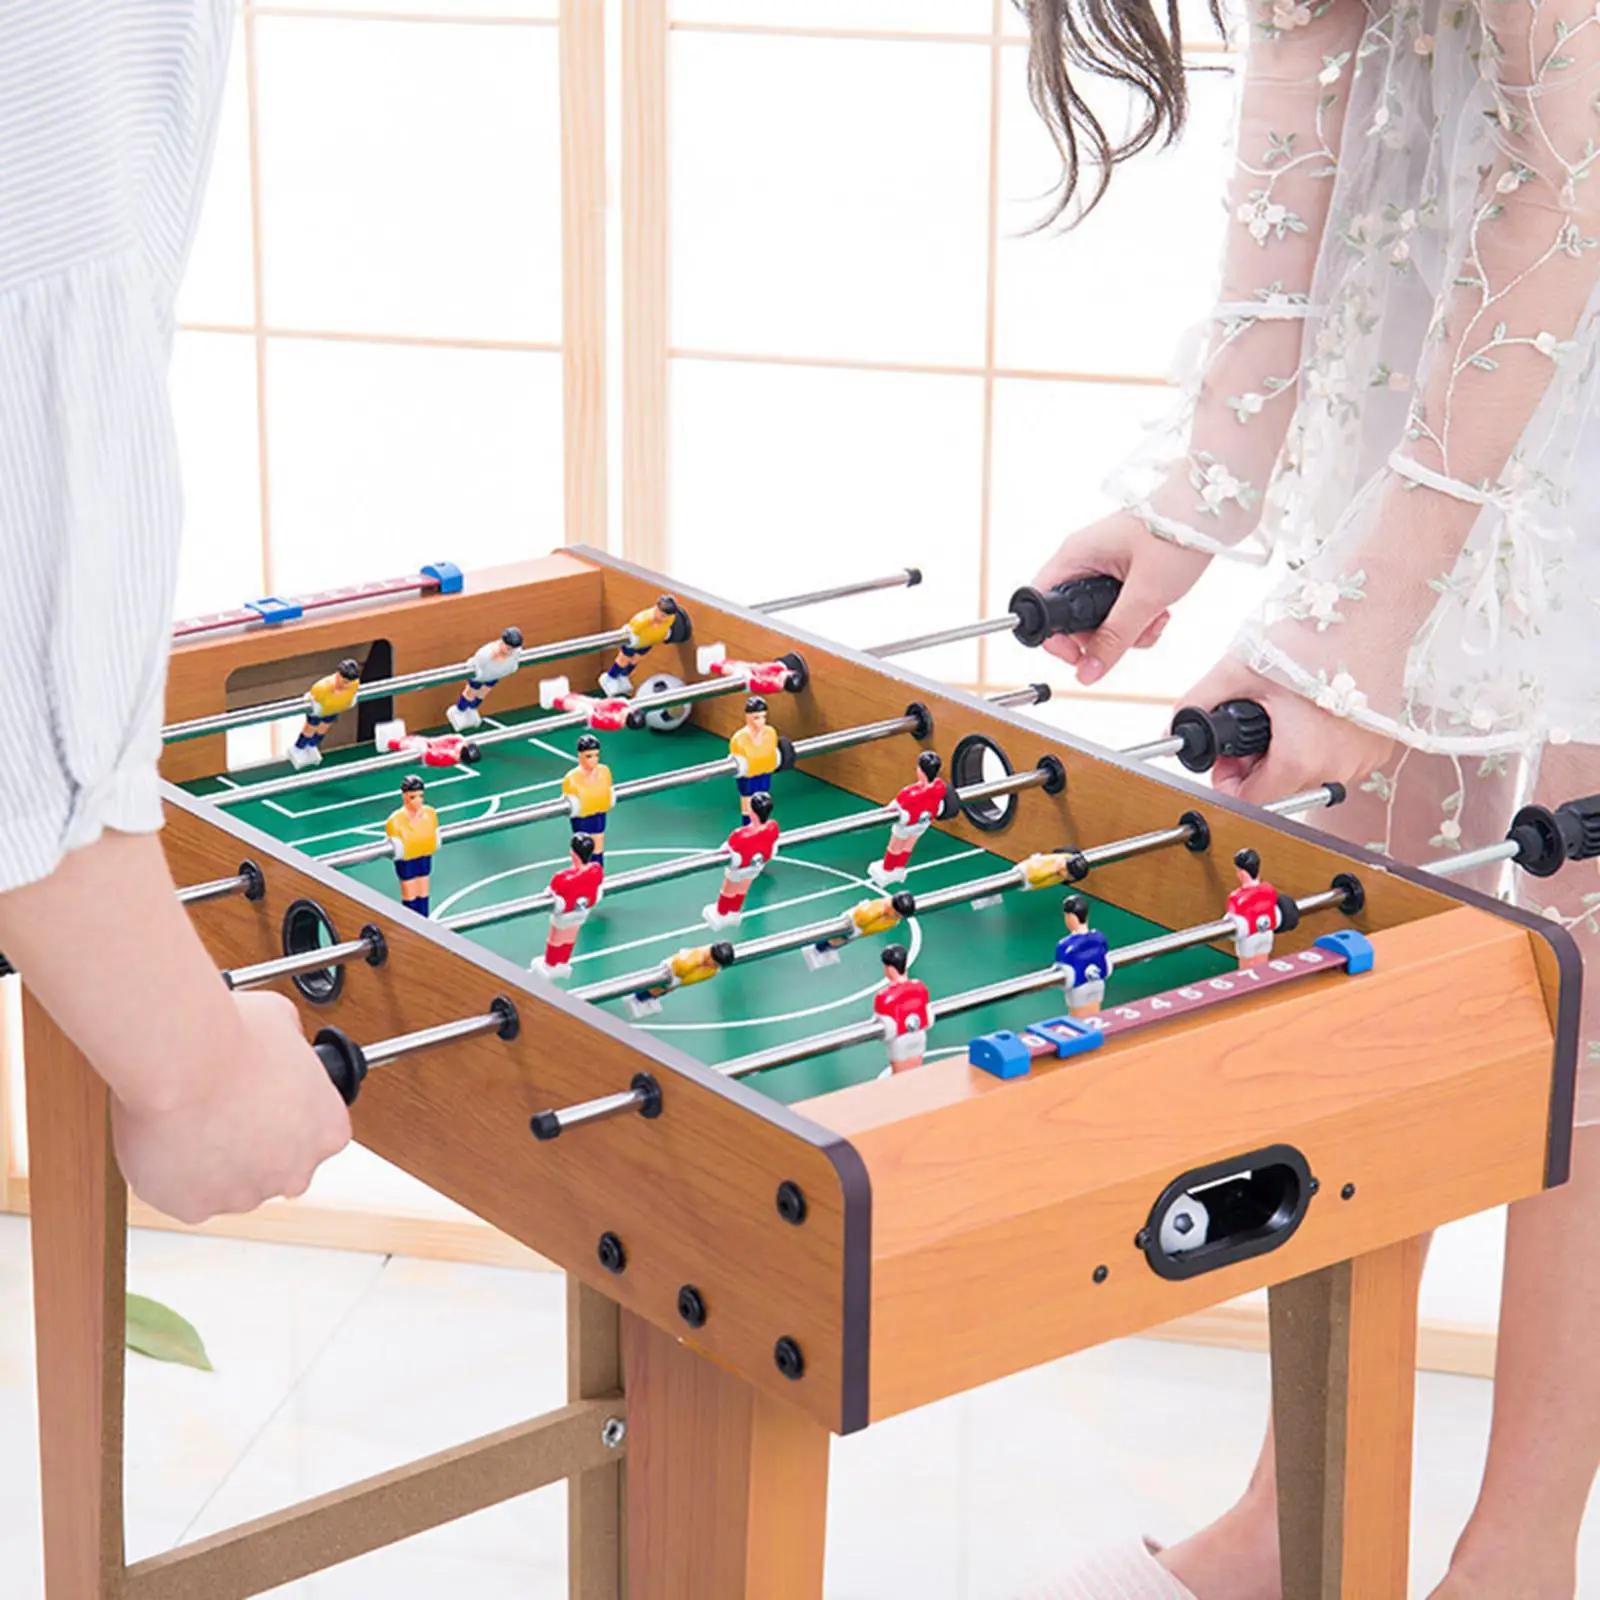 Wood Foosball Table Toy Tabletop Football Soccer Game Funny Football Game Play Sports Table Top Football Table for Kids Indoor